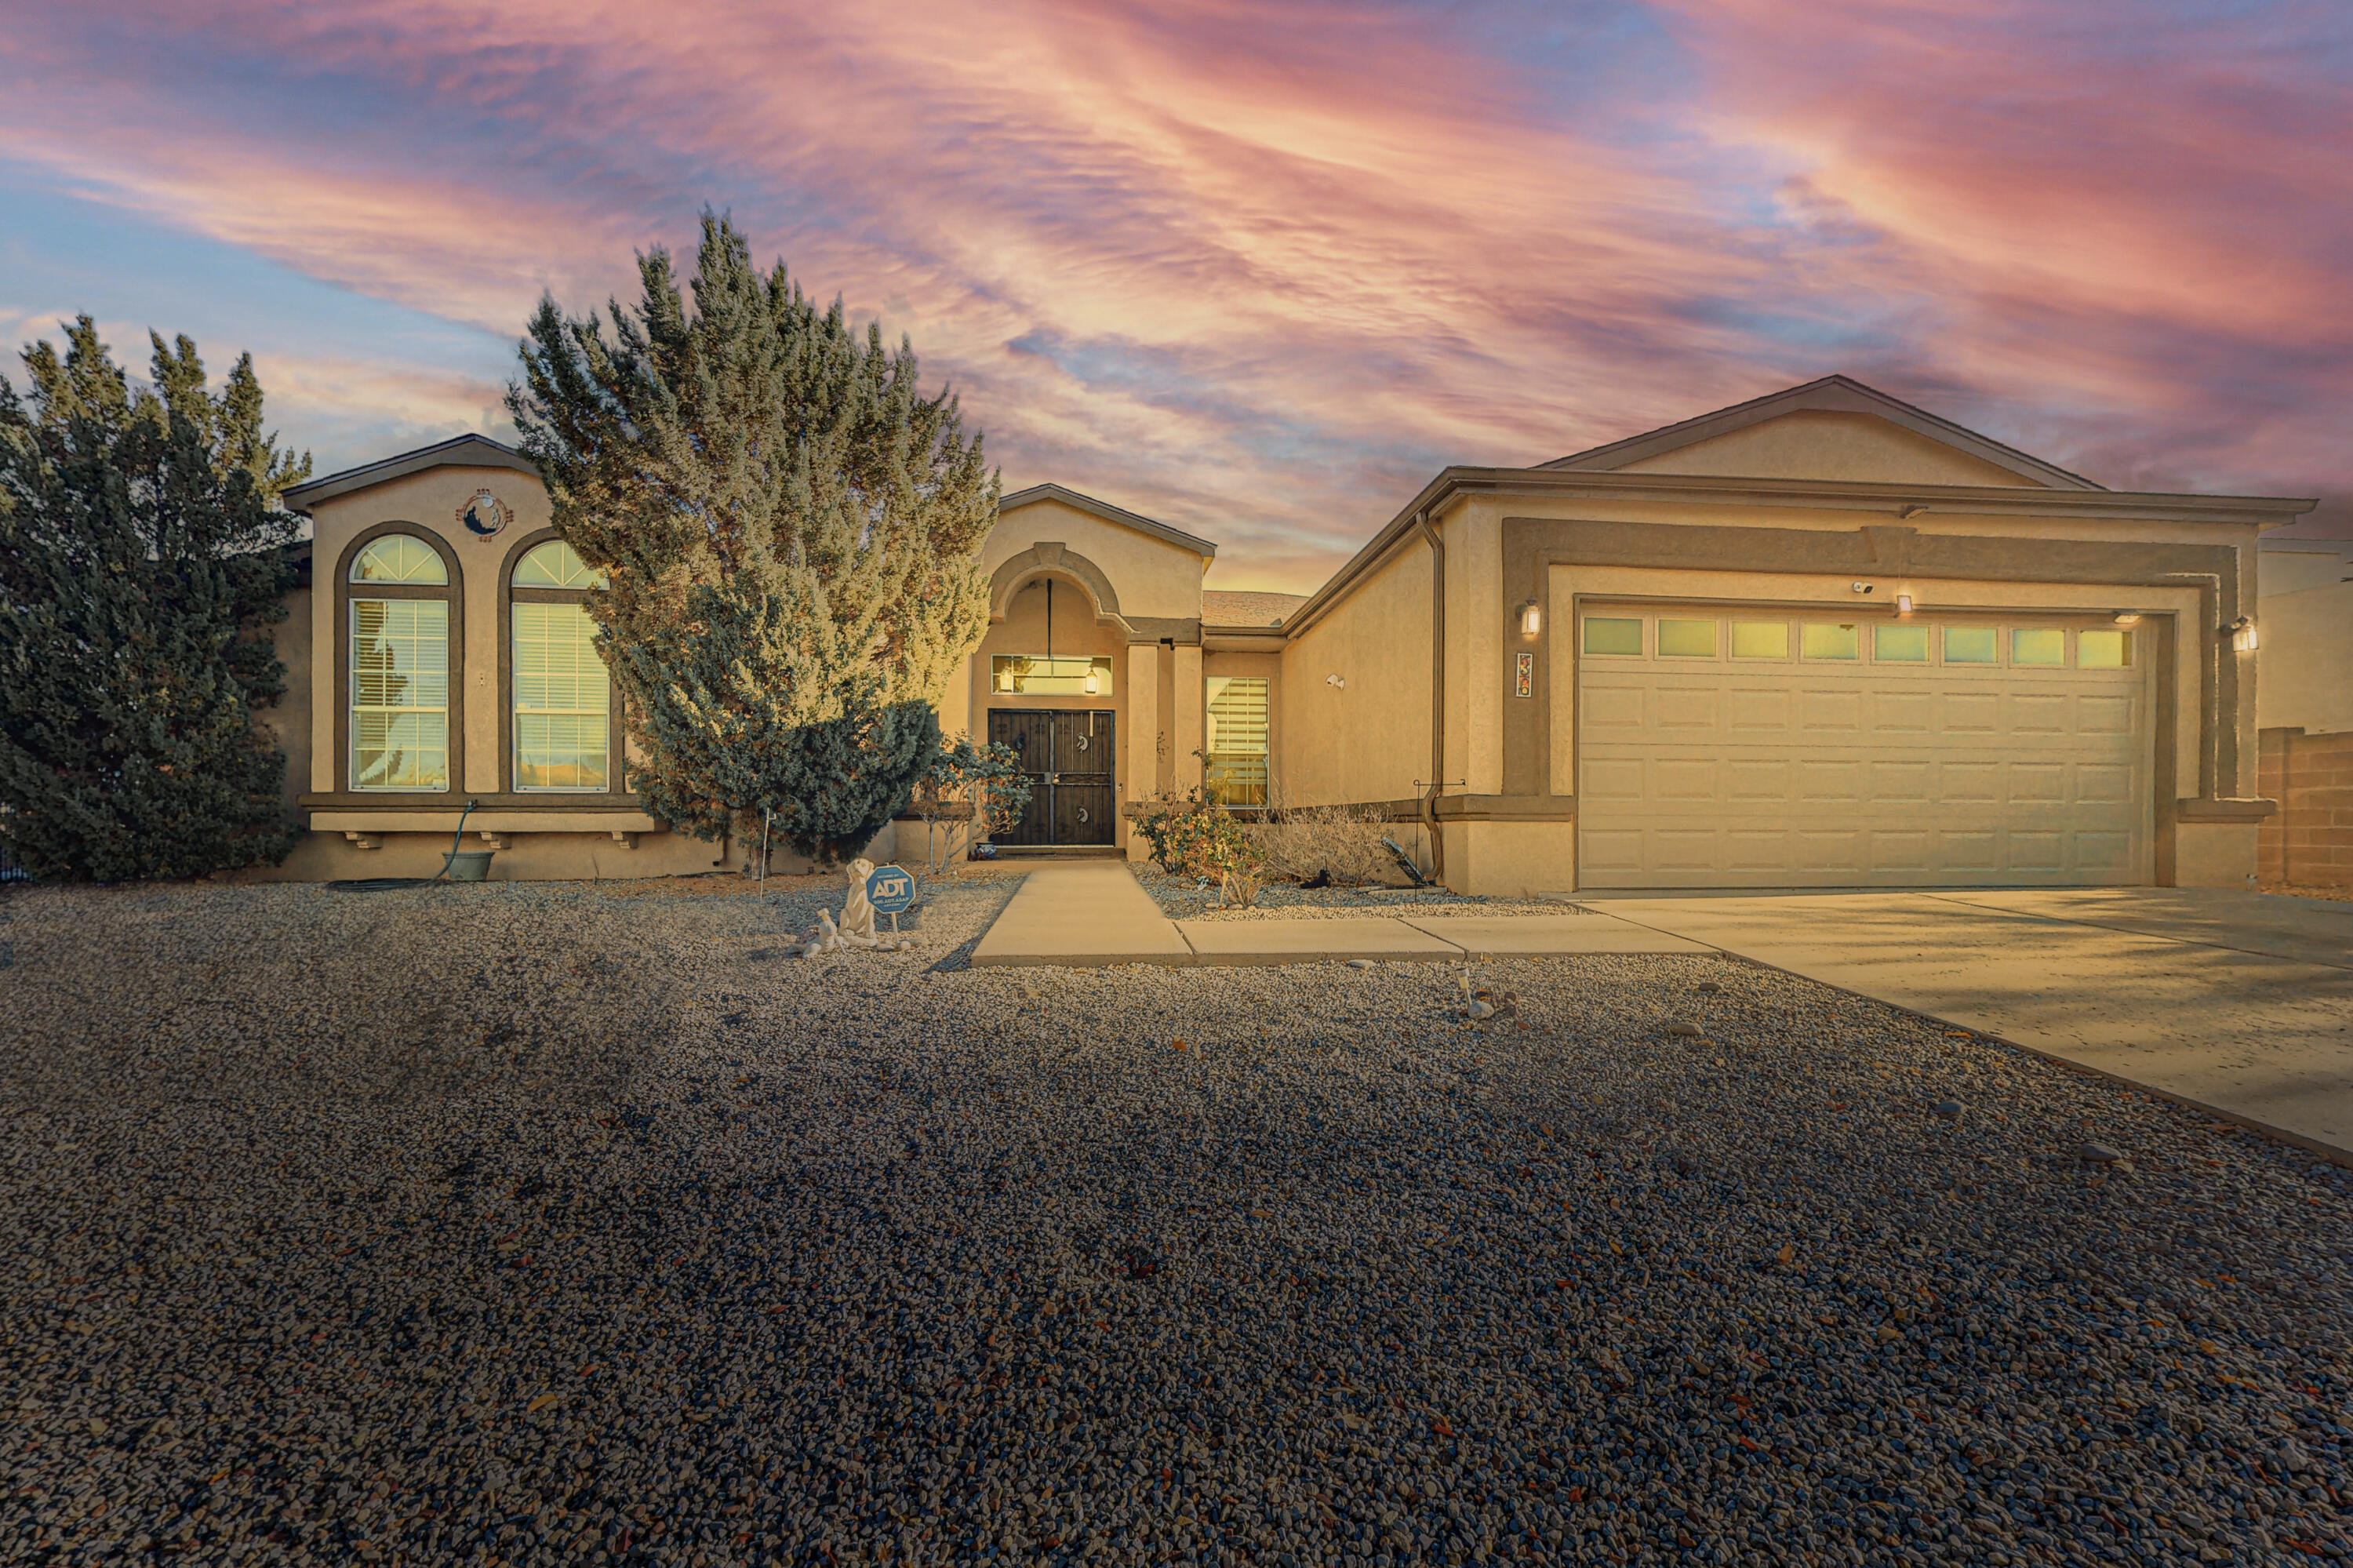 Welcome home to this large 4-bedroom home with gorgeous views of the Sandia Mountains! Home is located on a corner lot and has a great floor plan with an open living concept that features a family room, living room, formal dining room and a sunny sitting area perfect for a studio, play area, or office. Kitchen has silestone countertops with a built-in workstation that overlooks the living room and leads to formal dining room with tray ceilings. Hardwood floors in all 4 bedrooms, hall, family room and living room. Gorgeous xeriscaped backyard with turf, shed and great views. New refrigerated air system and newer roof and water heater (2020). No poly pipes. Schedule your showing today!